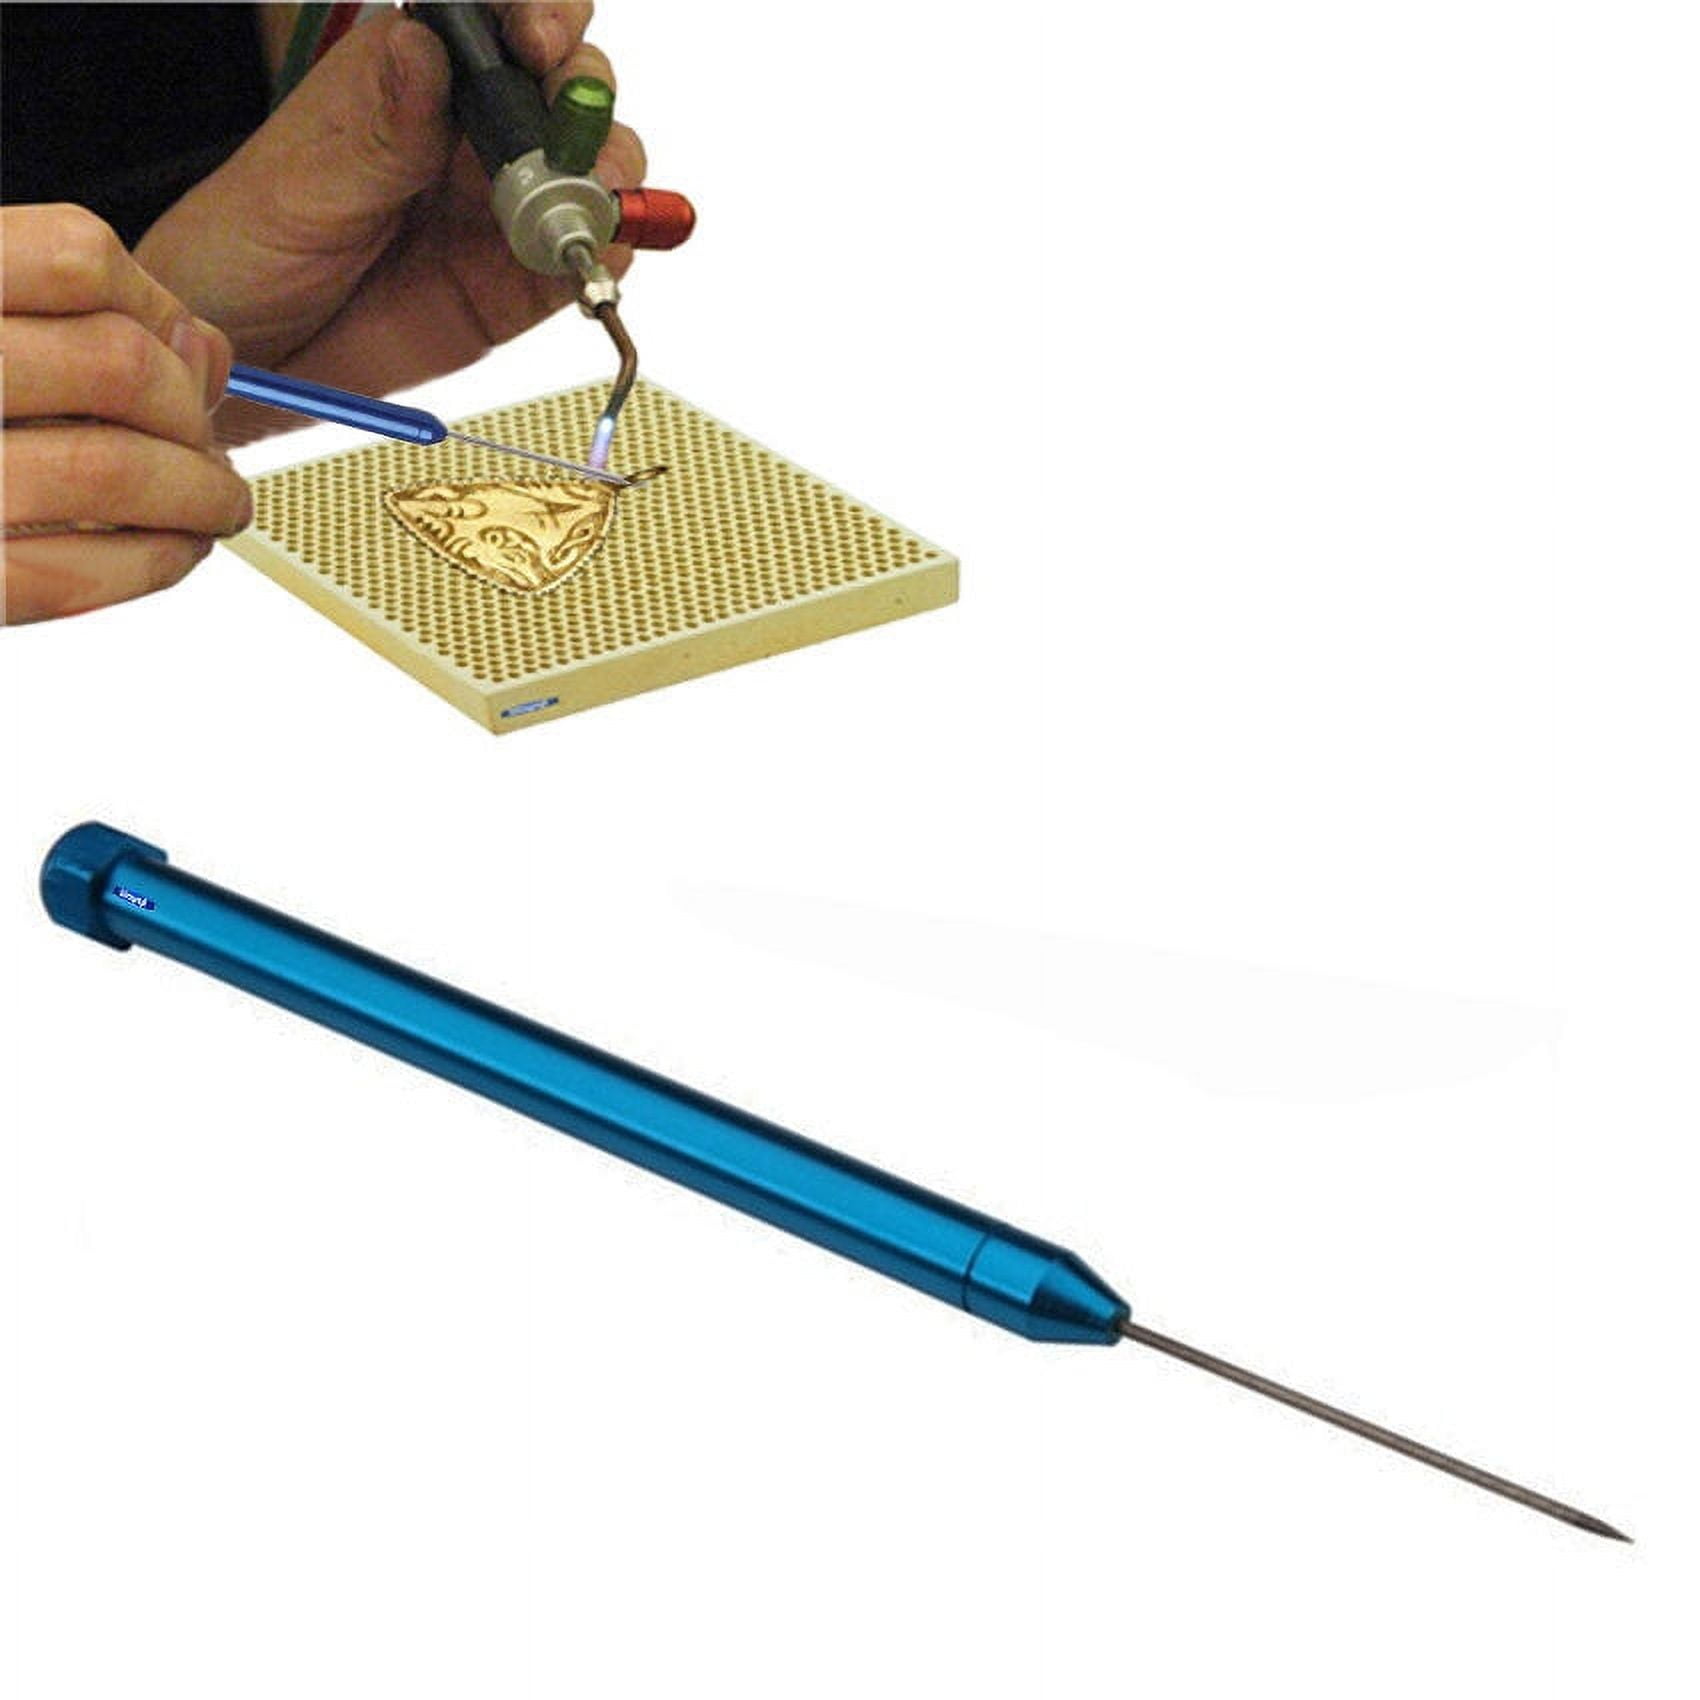 Soldering Kit for Jewelry Making Handy Flux 3rd Hand Base Fiber Grip  Tweezers Silver Wire and Sheet Ceramic Board Soldering Pick